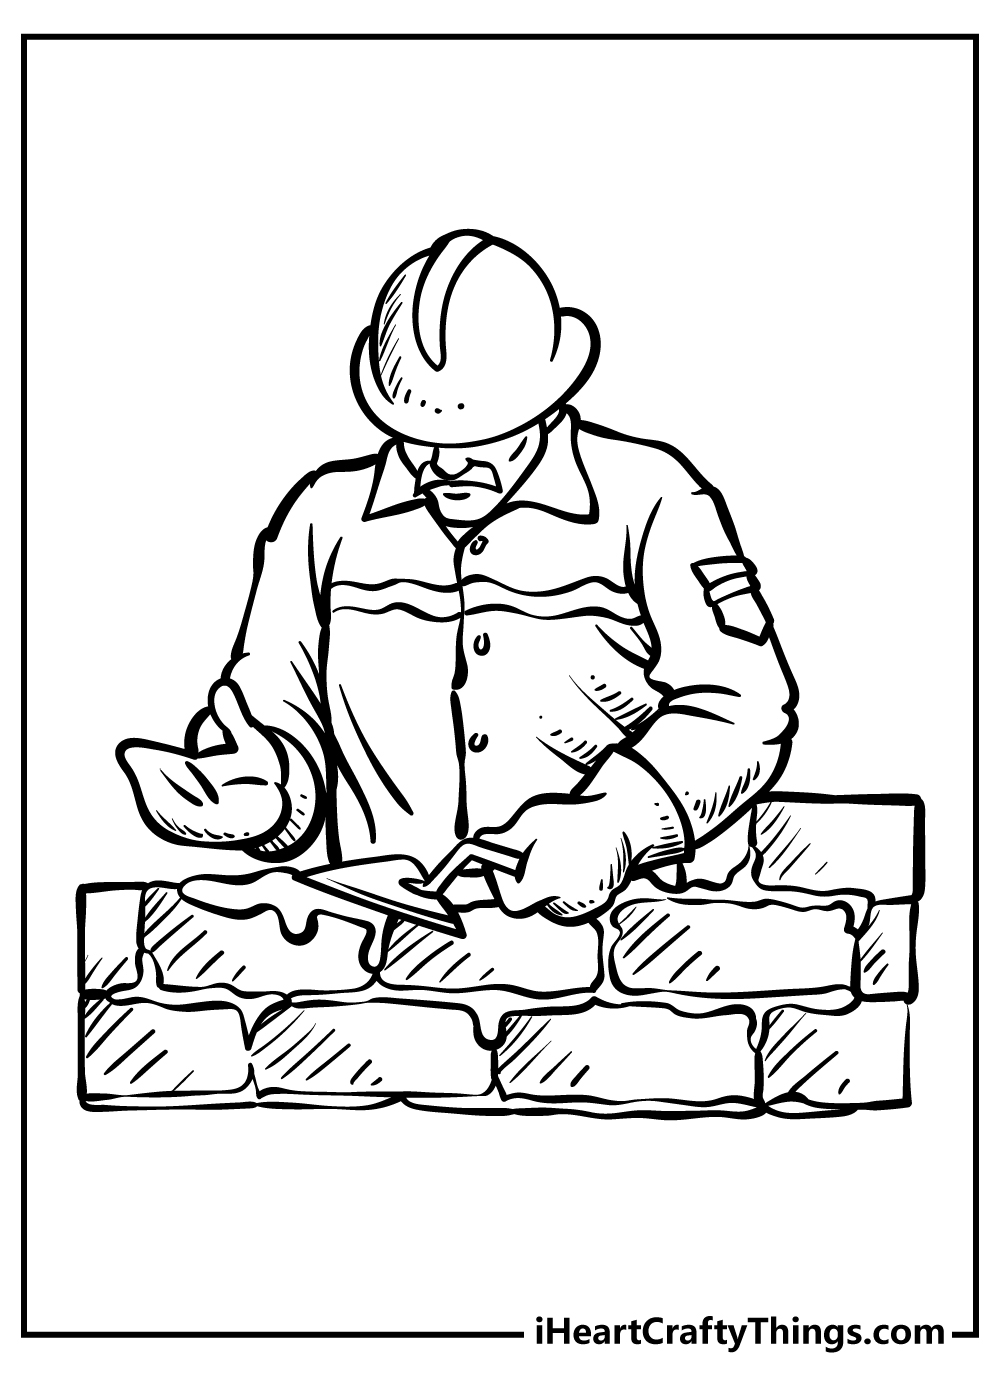 Construction Coloring Pages for adults free printable